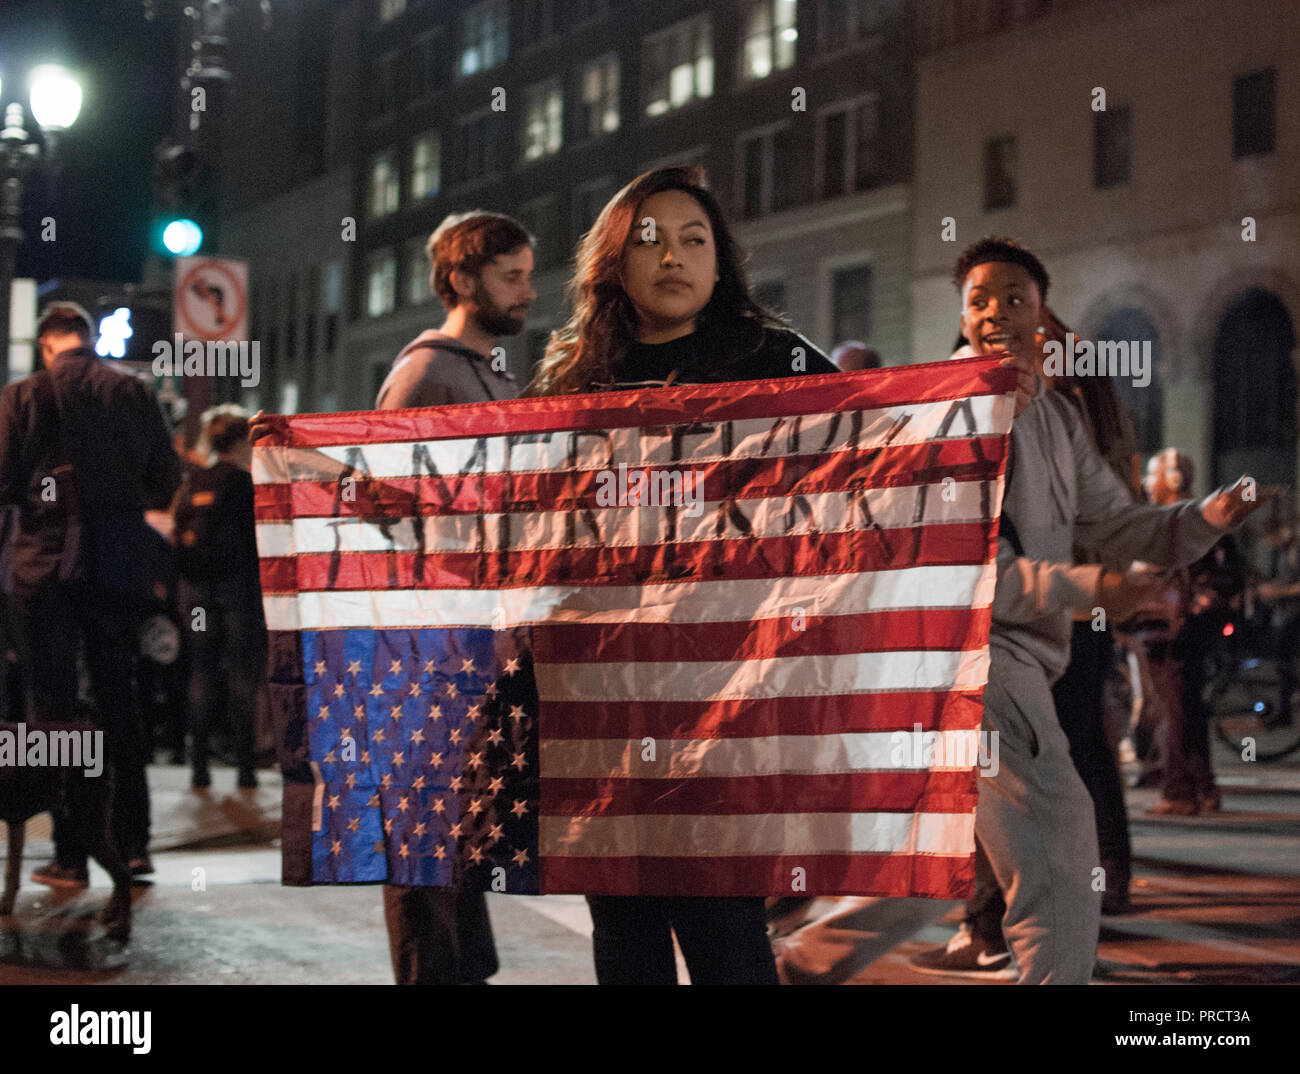 A woman carries an upside-down American flag reading 'AmeriKKKa' during protests in Oakland against the election of Donald Trump on Nov. 9, 2016. Stock Photo